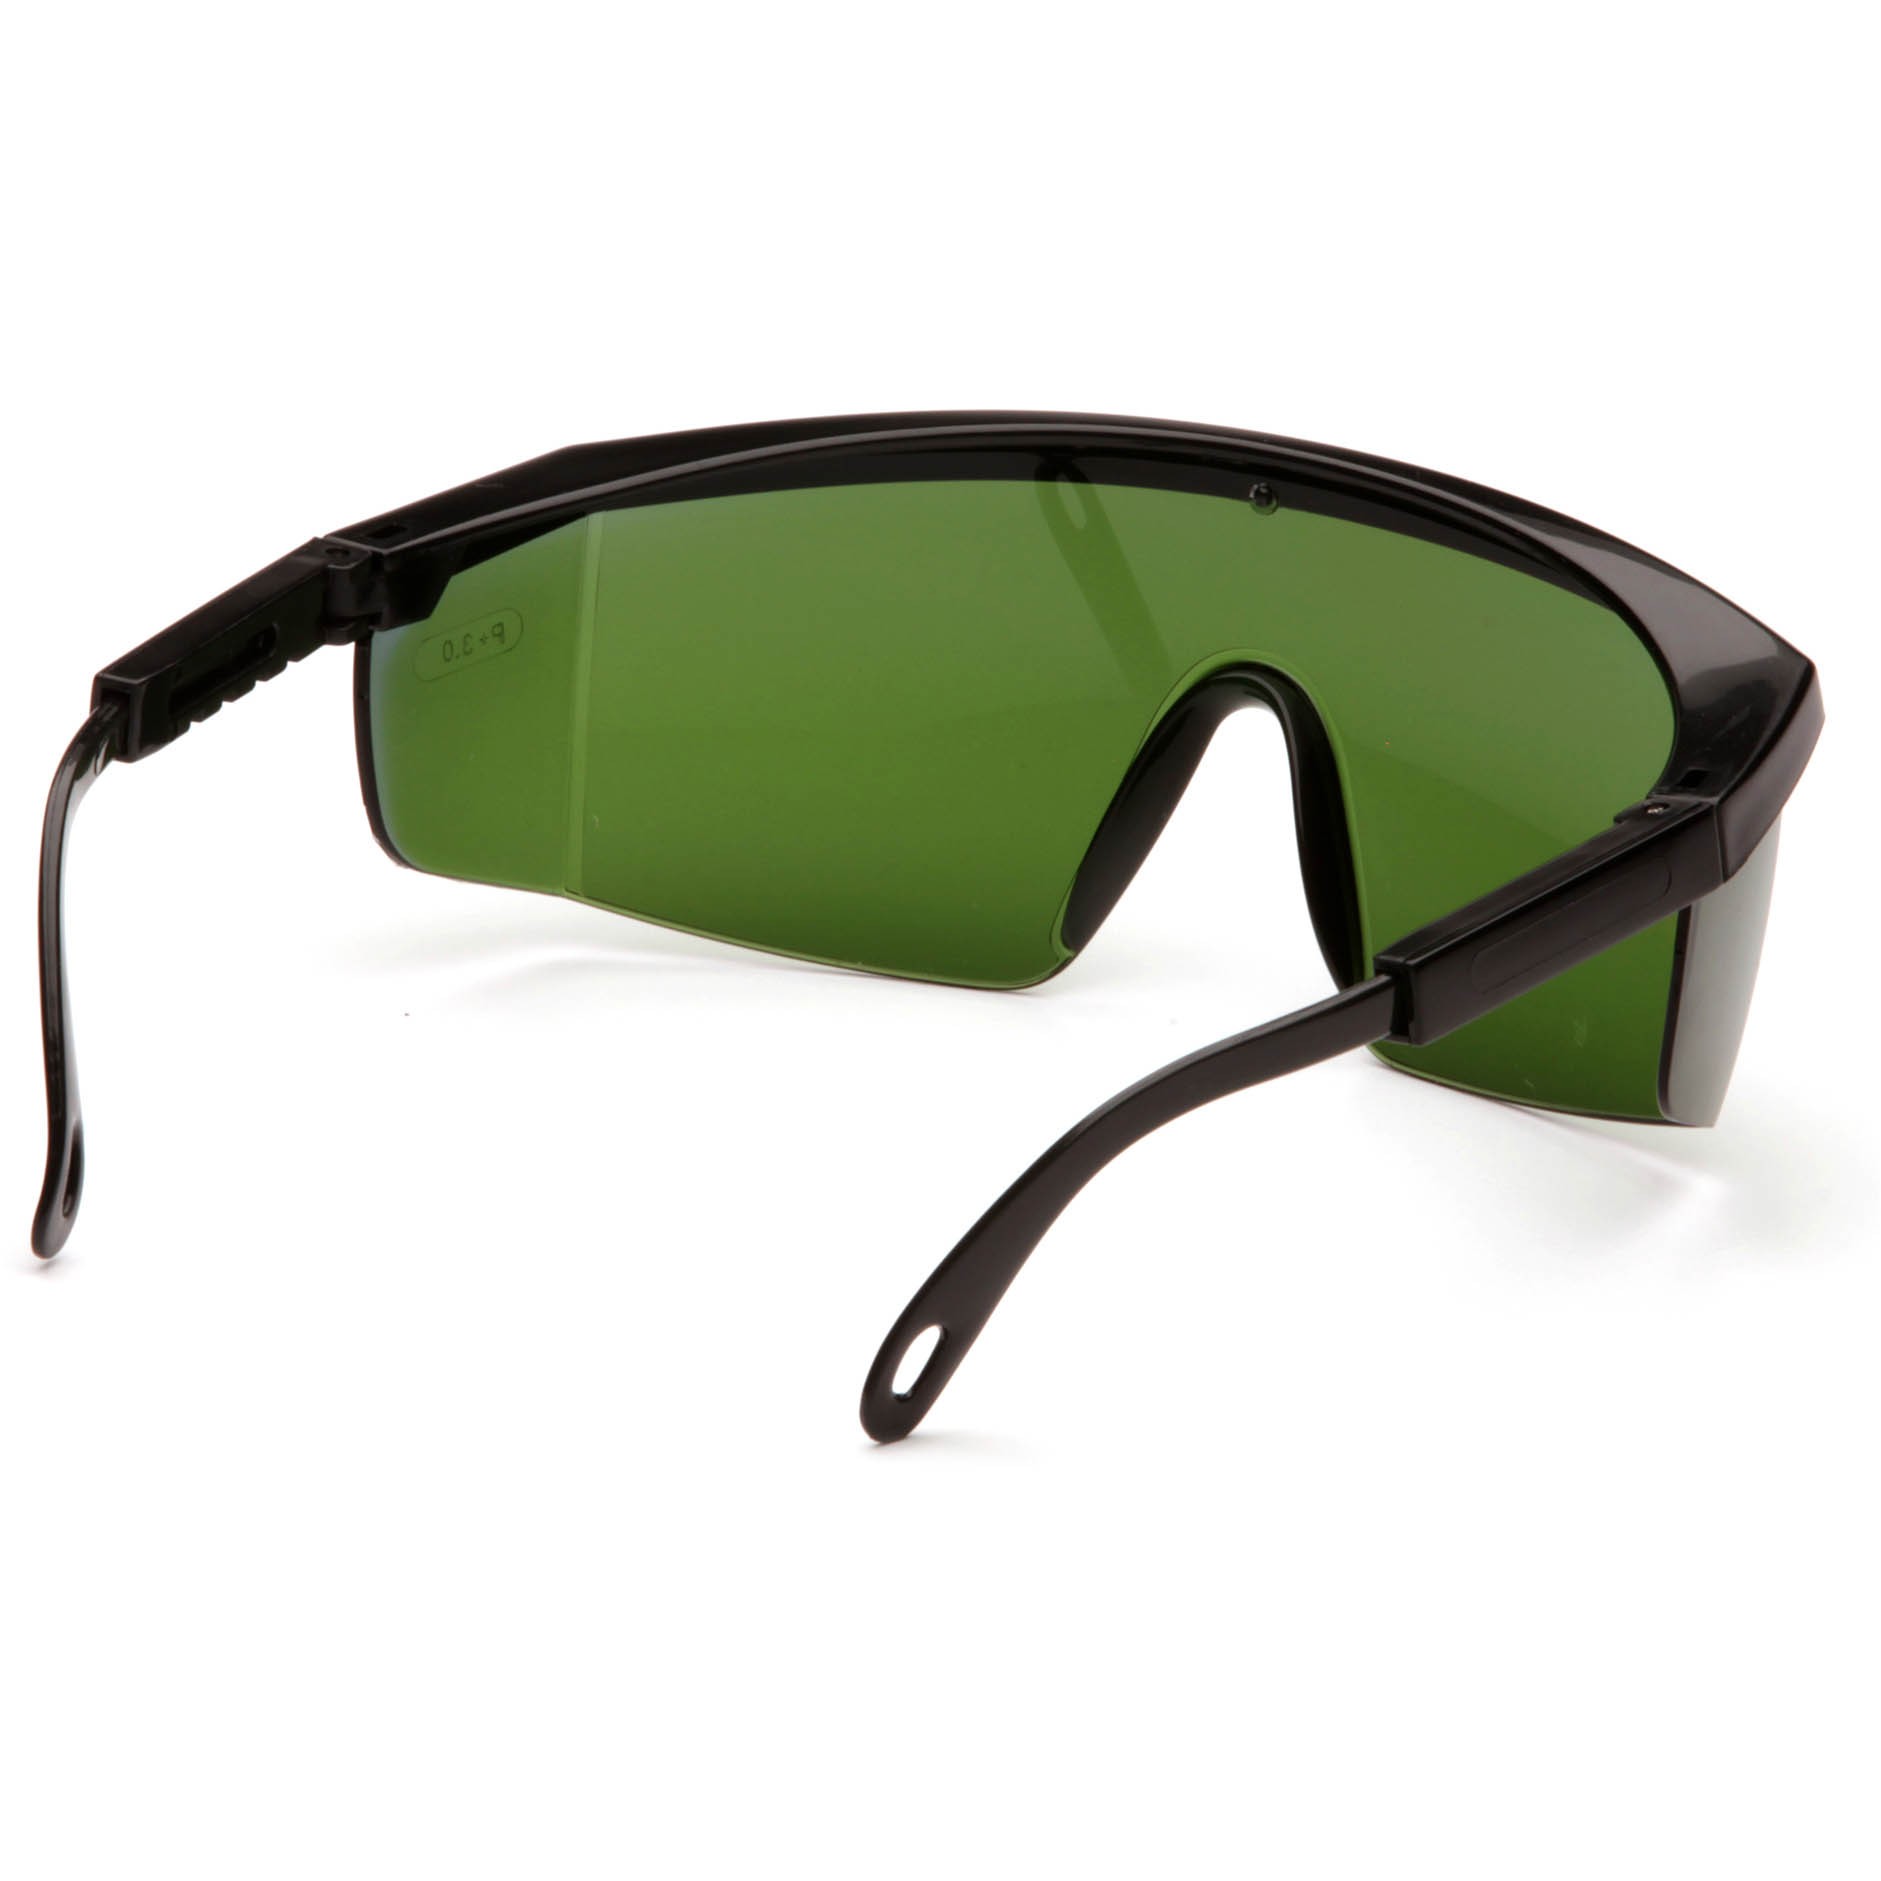 Double Light Sheet Reading Lens safety glasses Zorge Black//clear 1.5